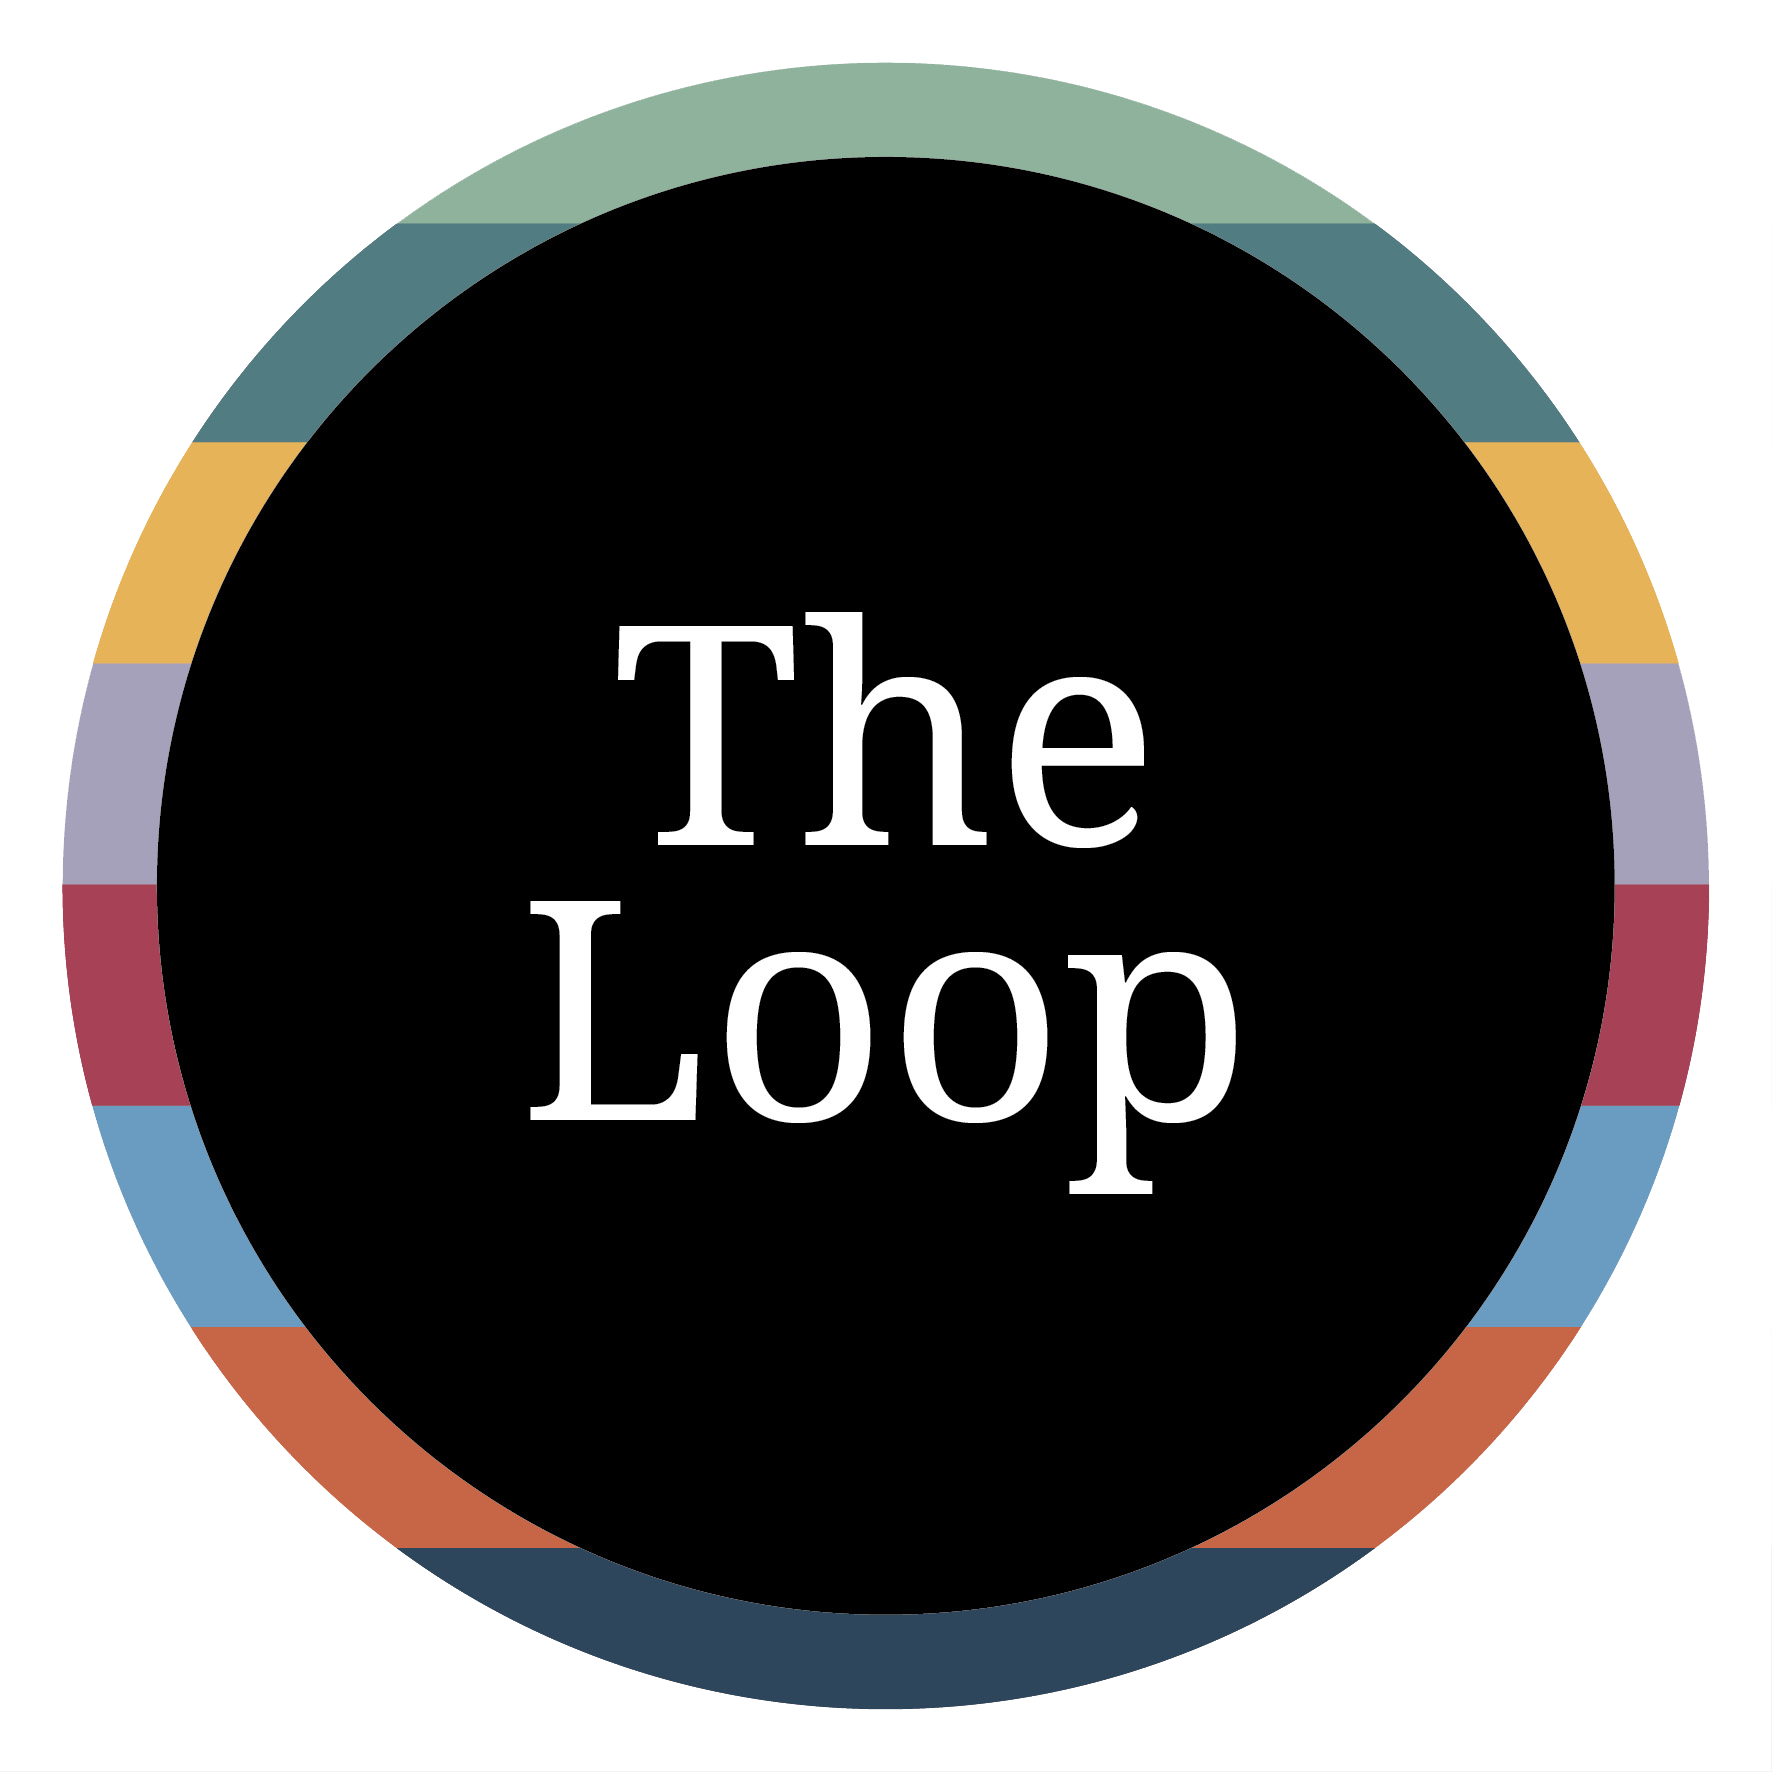 The loop icon